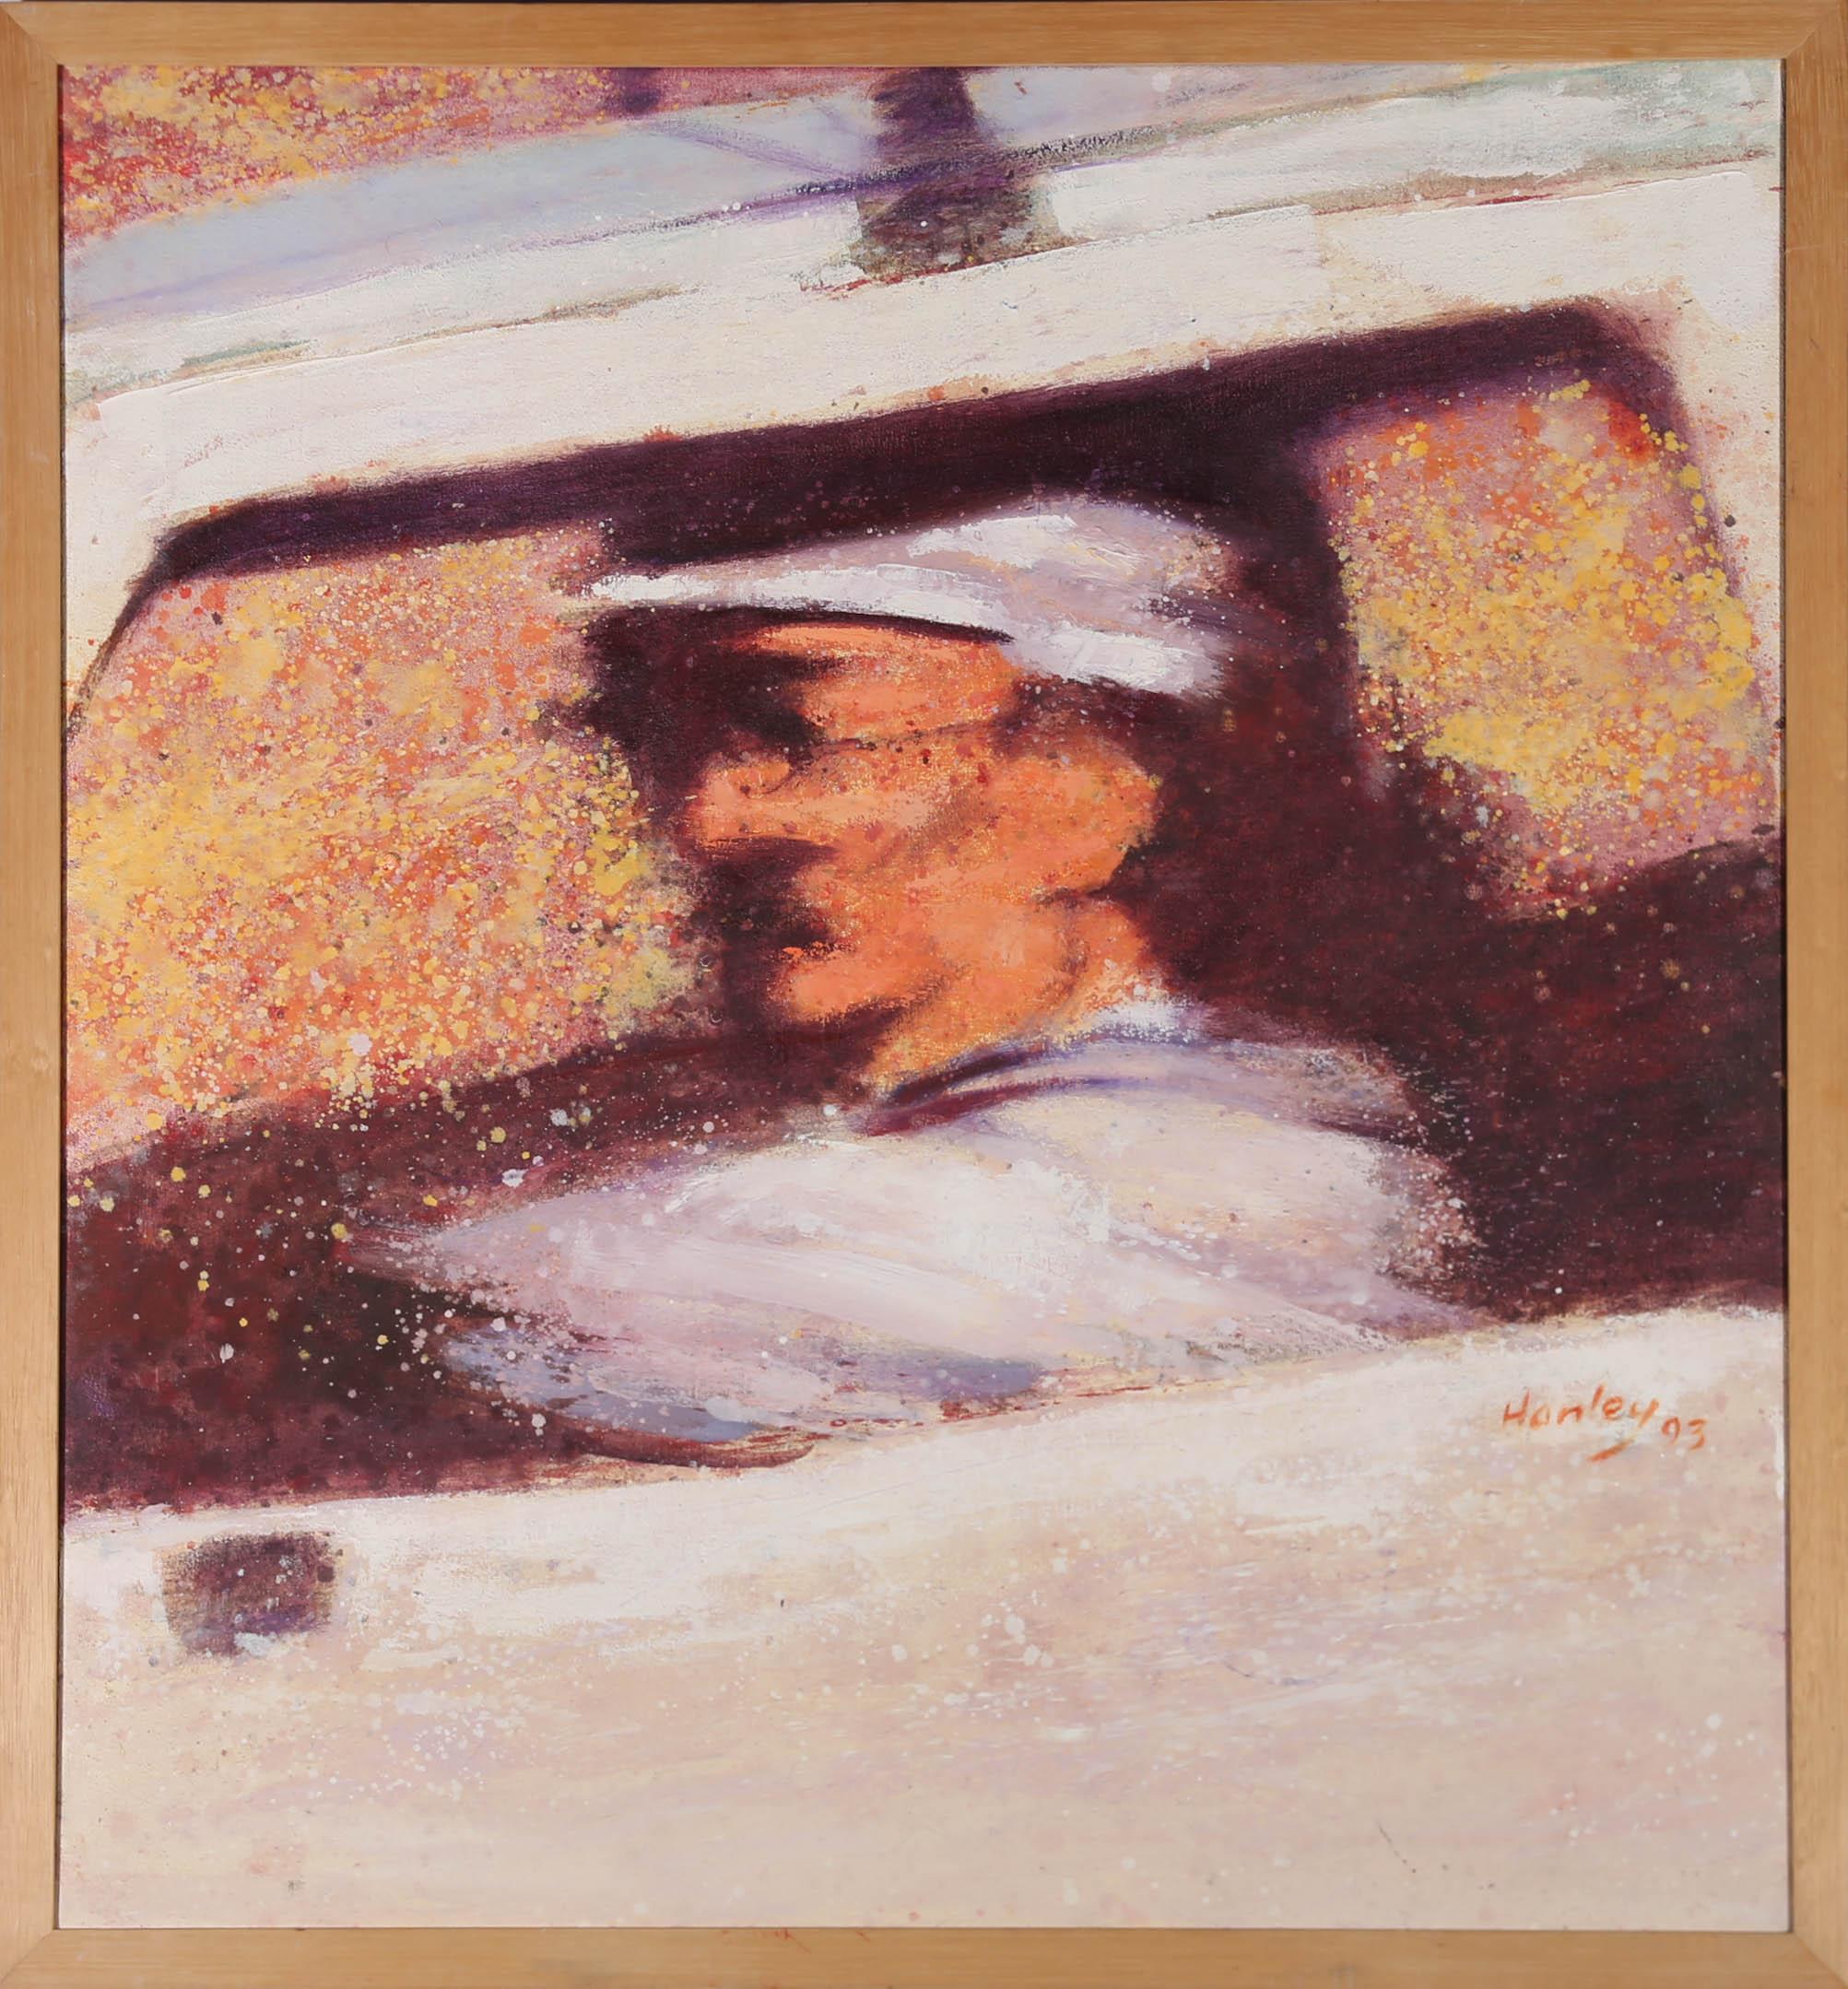 A striking portrait depicting a man dressed all in white, matching the exterior of his car as he drives through the city. Signed and dated to the lower right. Presented in a wooden frame. On canvas on stretchers.